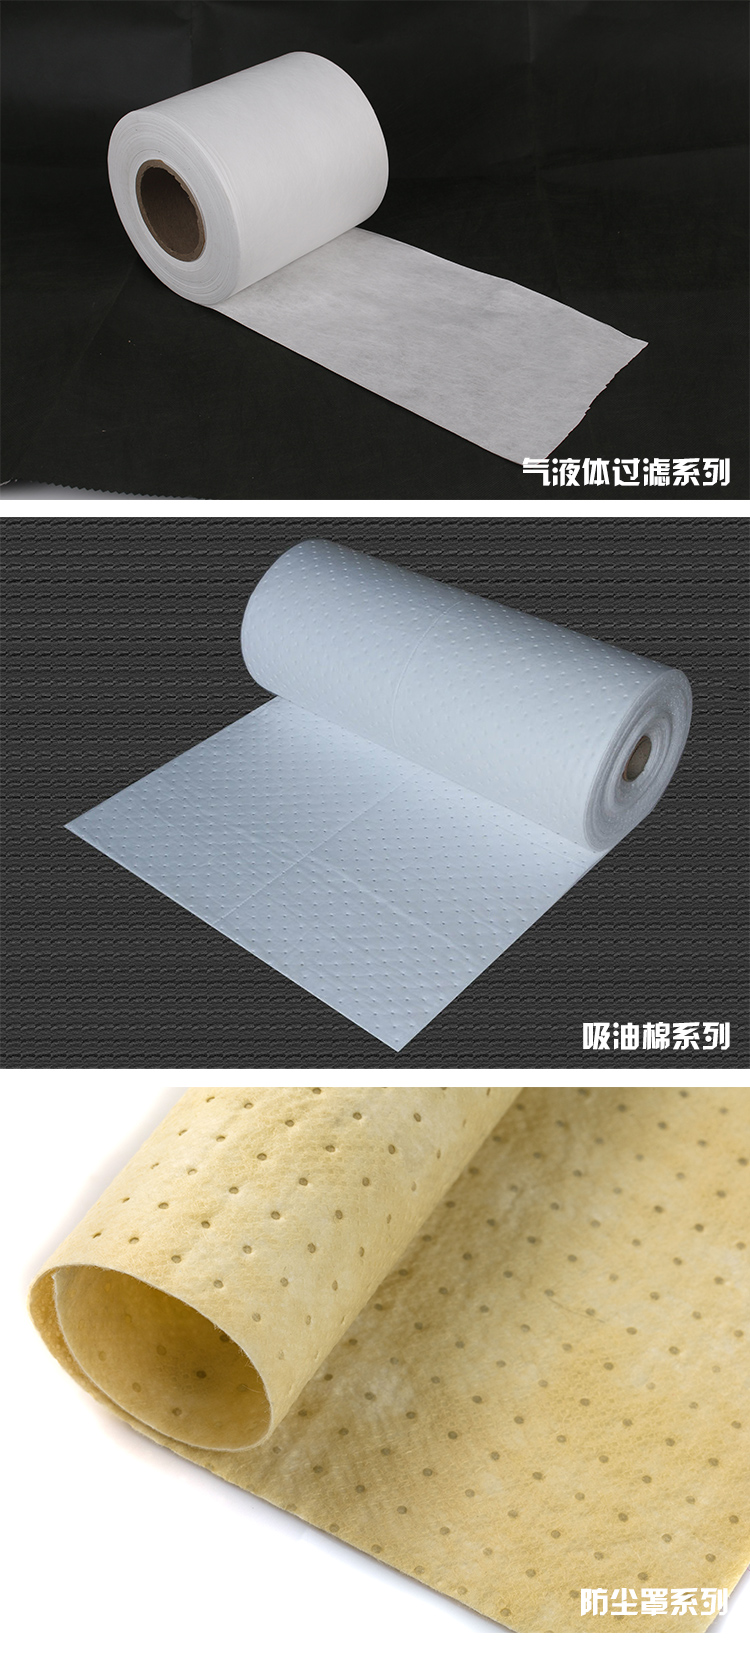 Household disposable wiping cloth, kitchen wiping cloth, fruit stove cleaning, manufacturer's spot wholesale